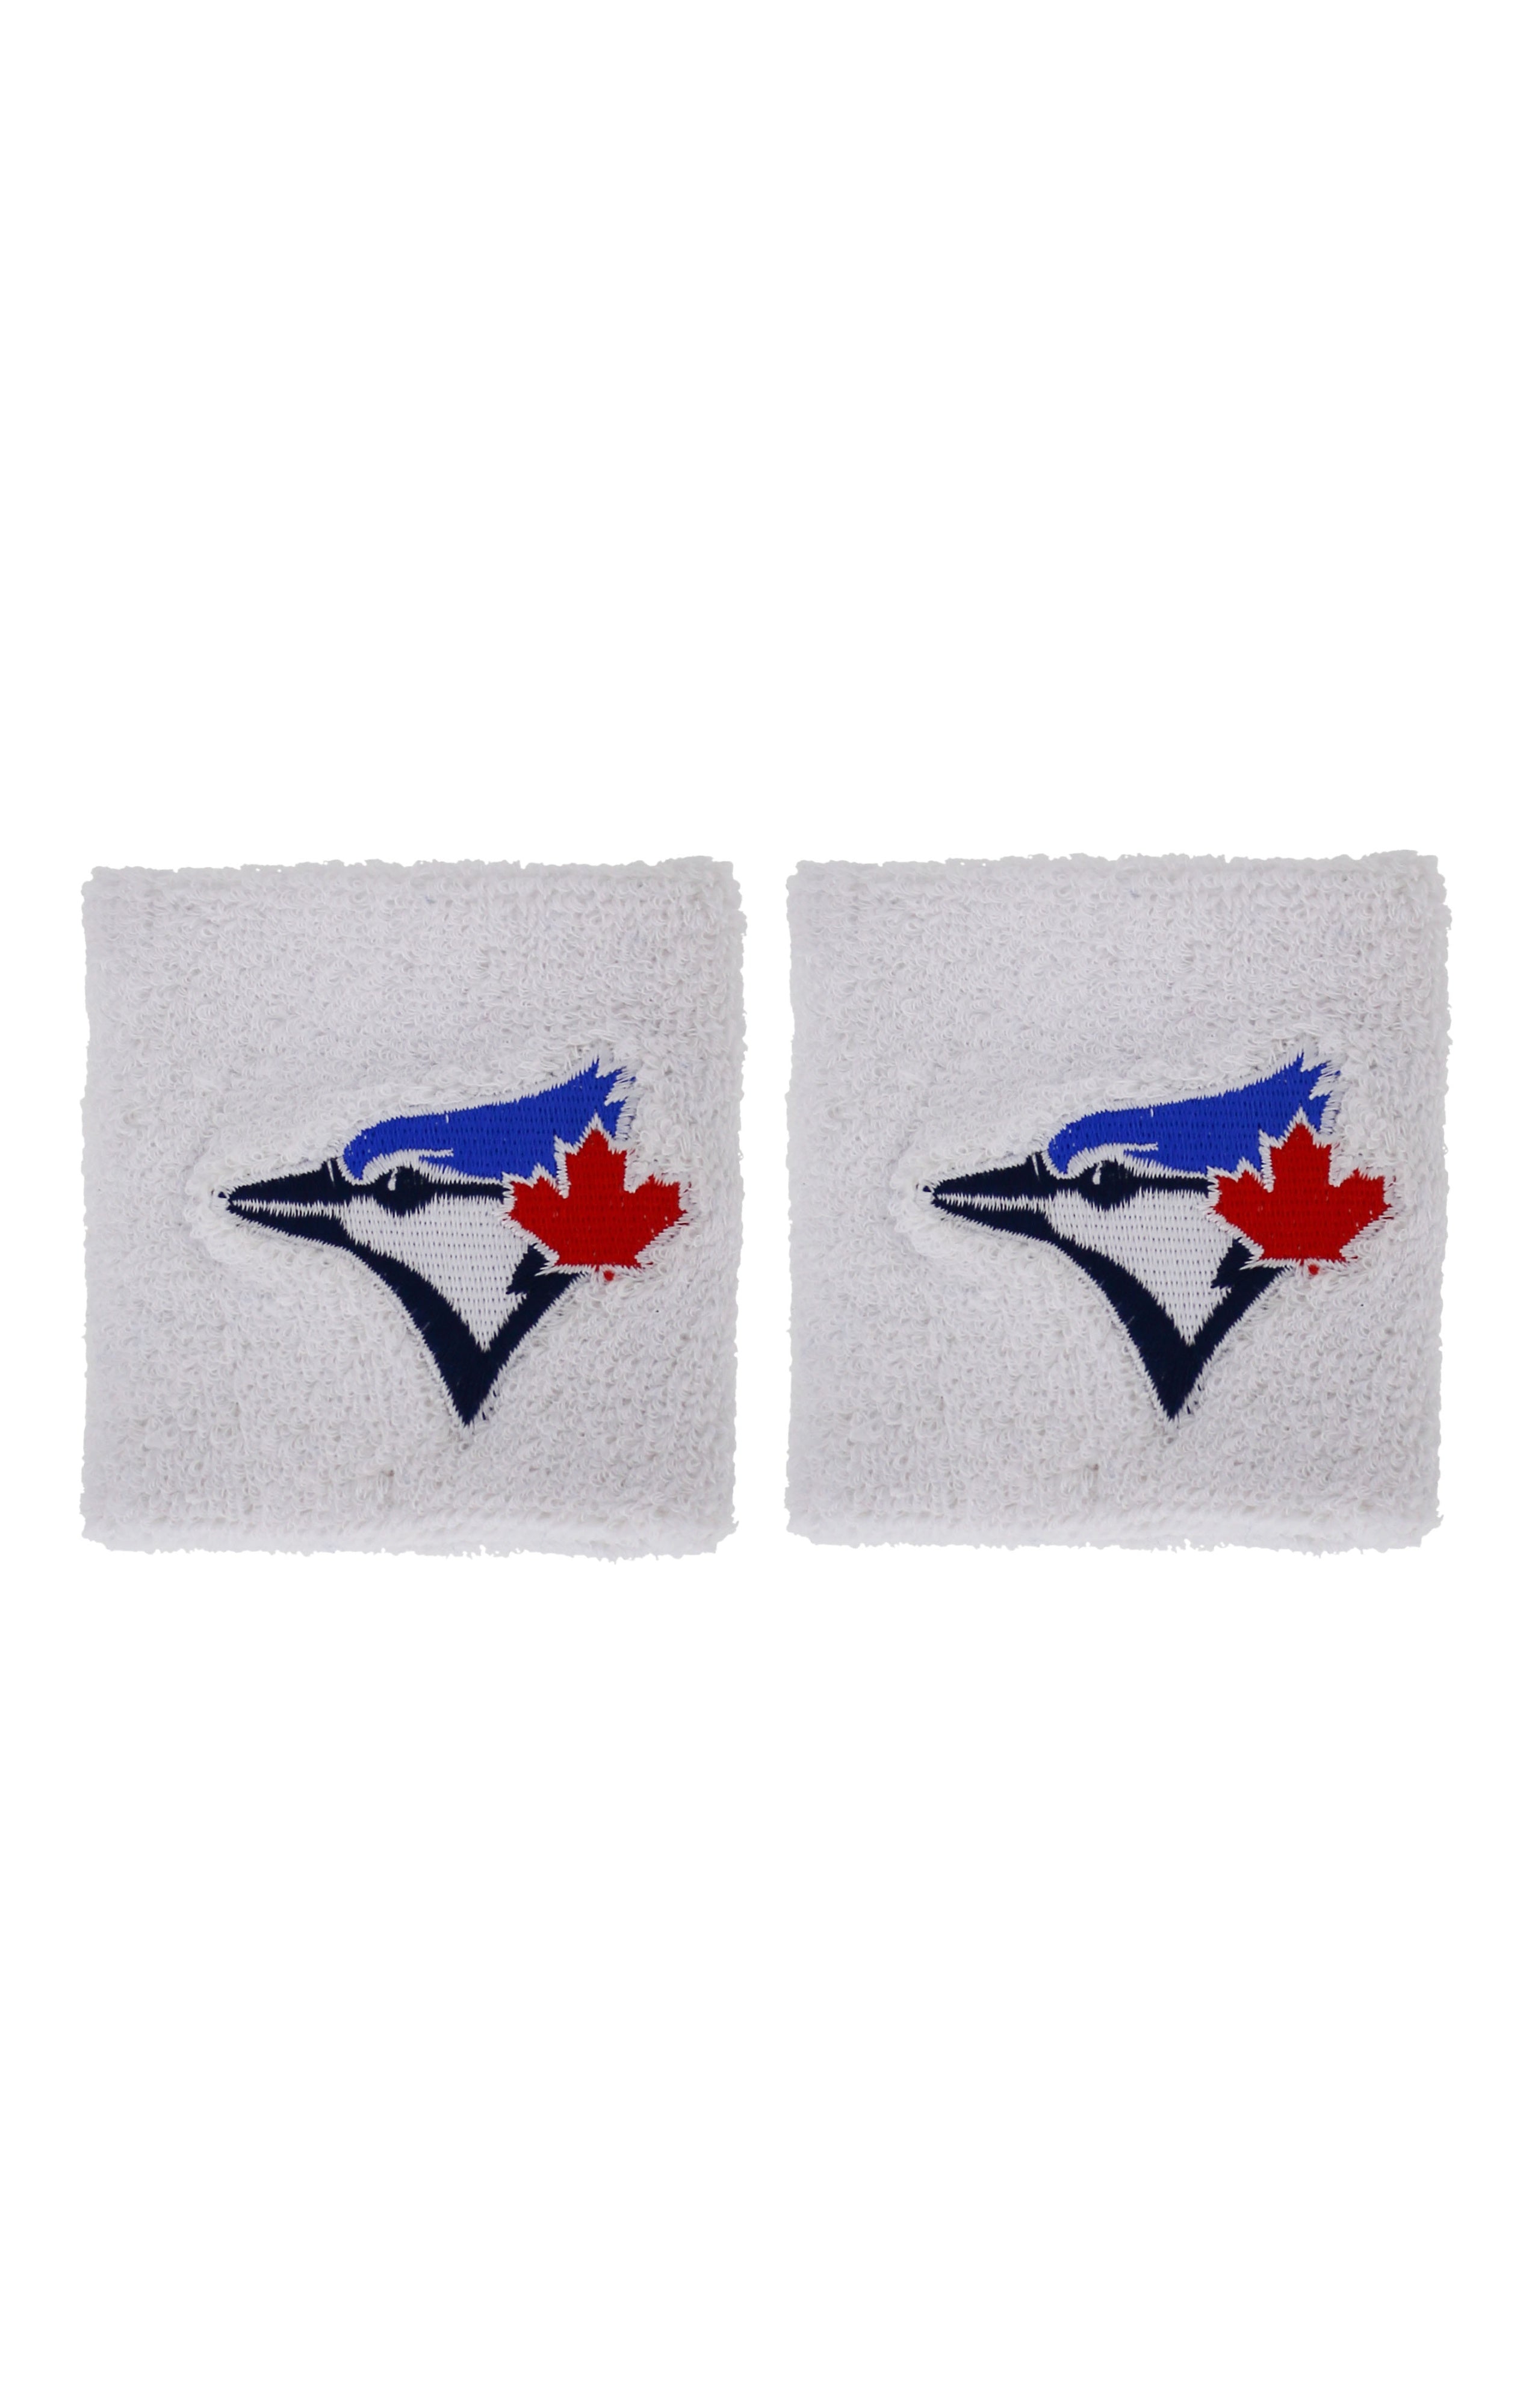 Blue Jays Accessories - Wristbands White s/2